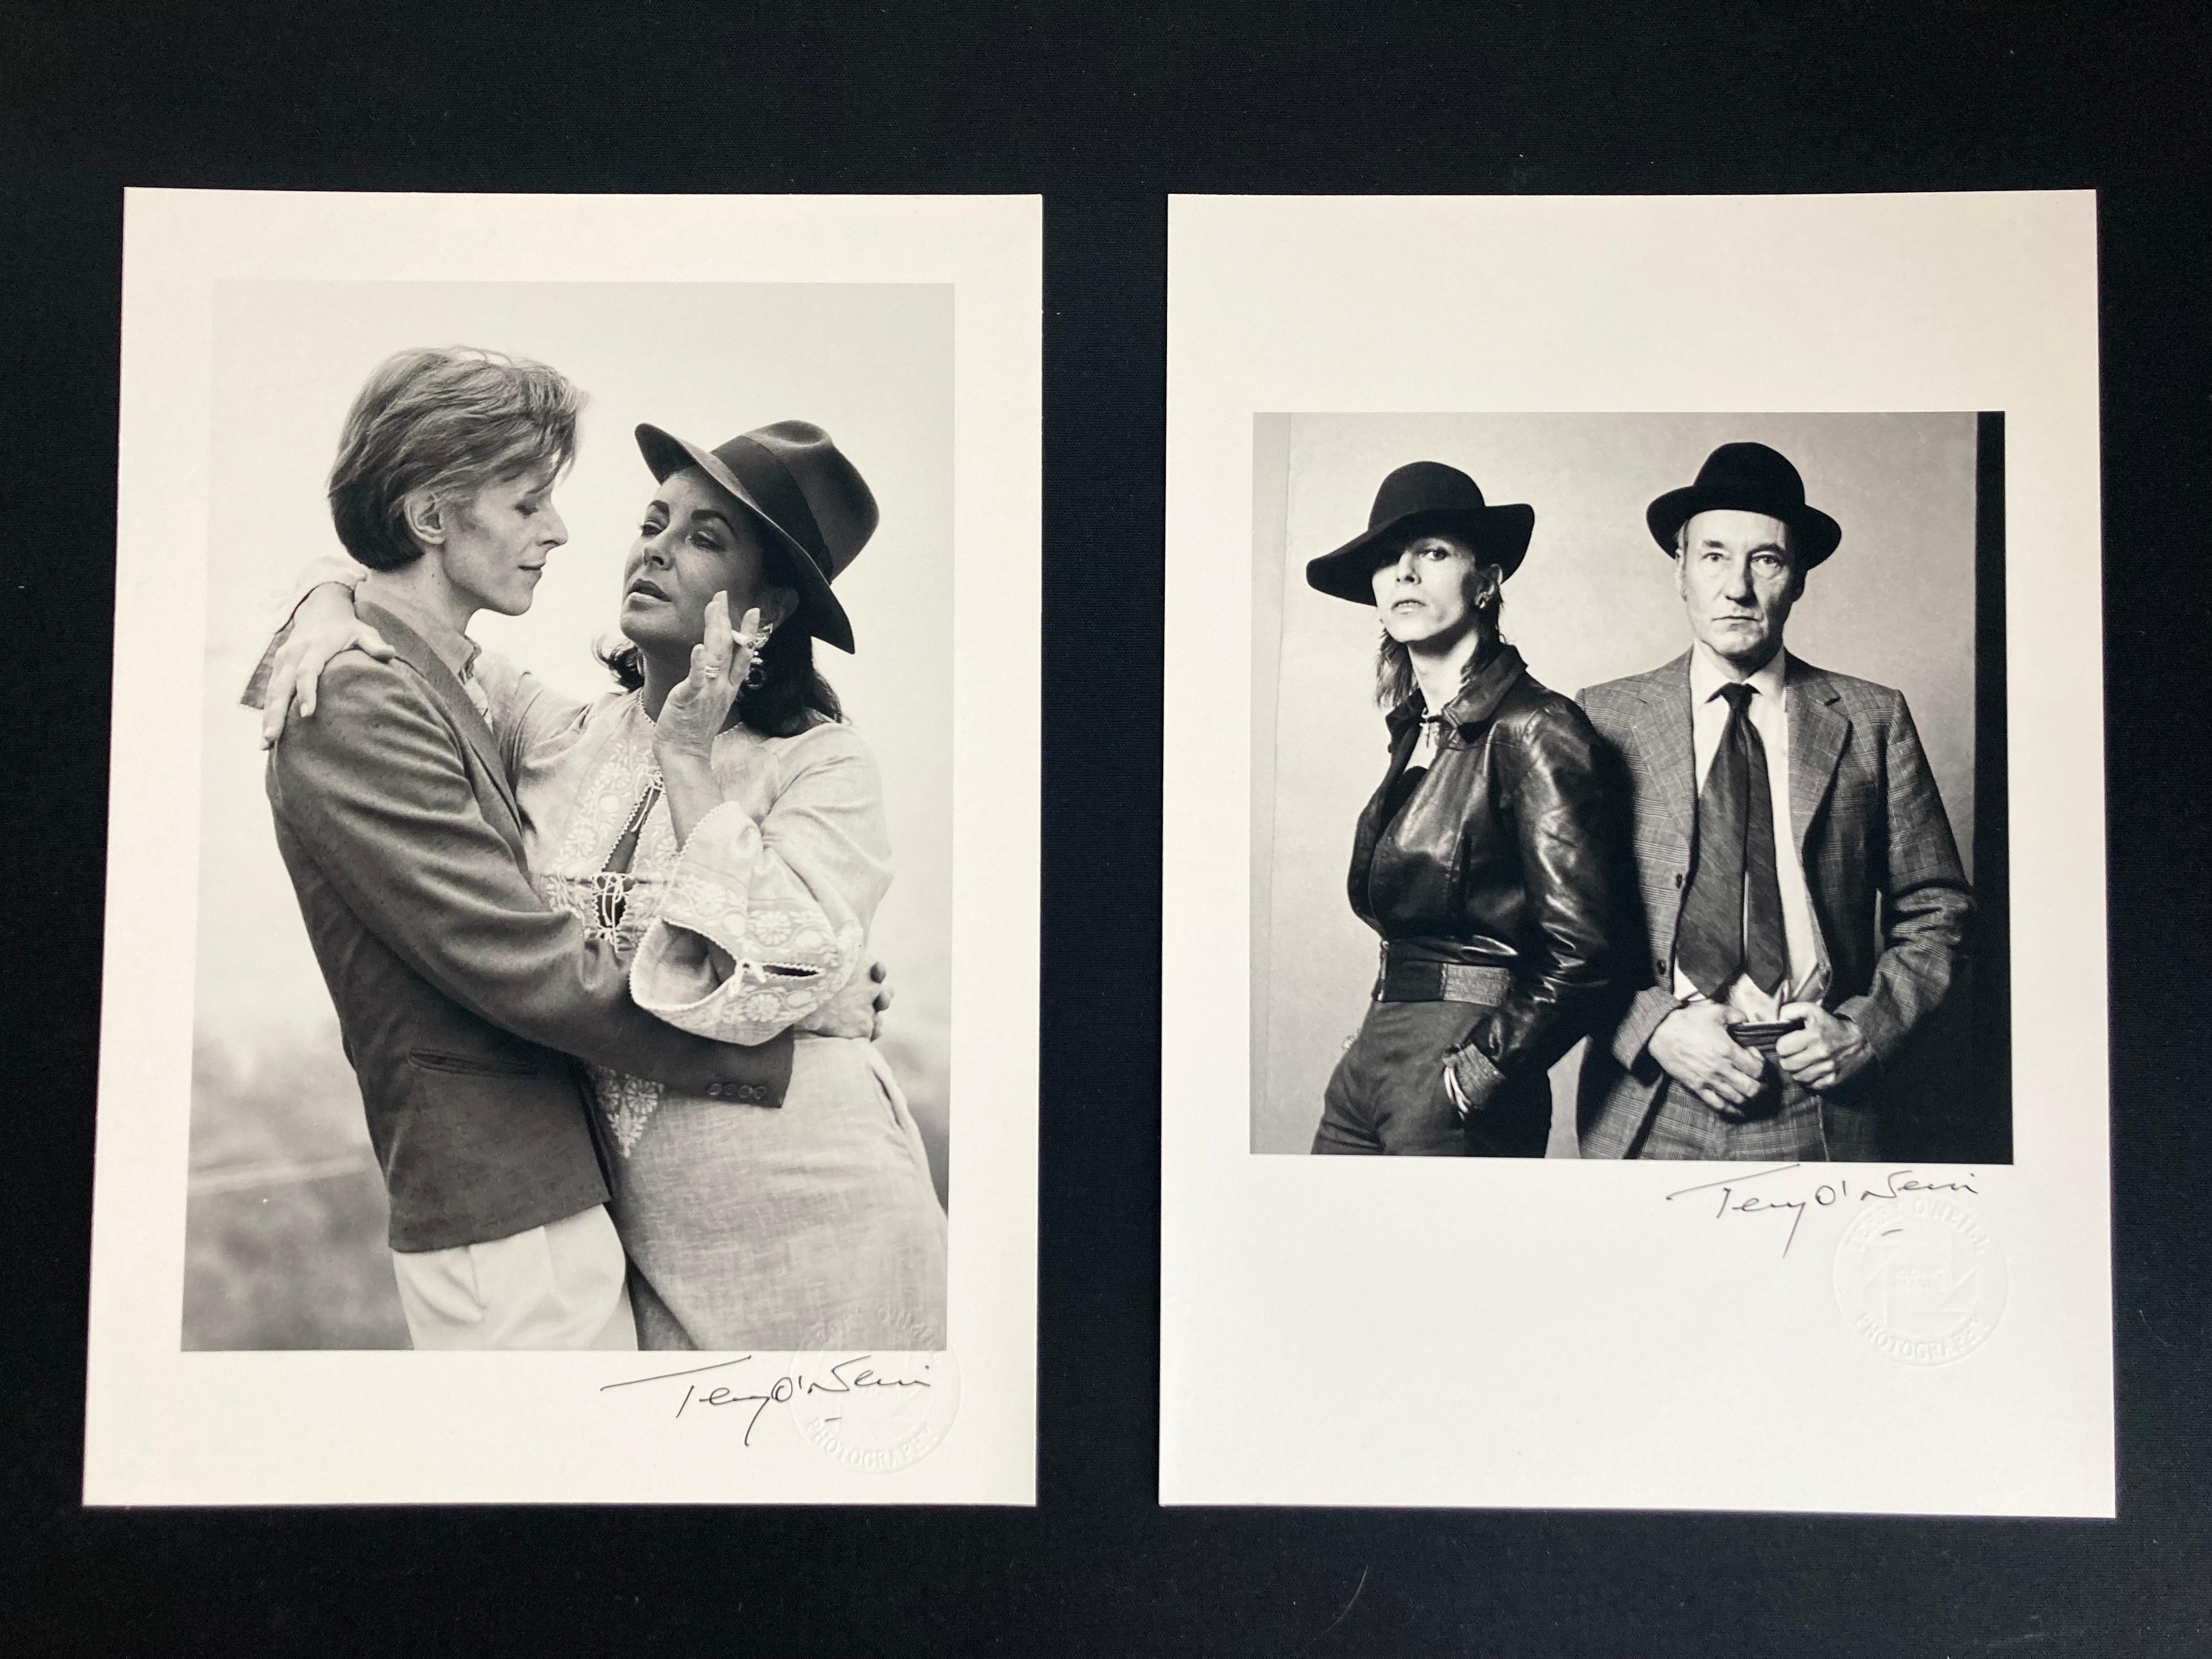 Set of two, signed open edition, 8” x 10” archival prints by Terry O'Neill, featuring Terry O’Neill’s embossed studio stamp

One print features Bowie with author, William Burroughs, the other with actress, Elizabeth Taylor. Both were taken in 1974.